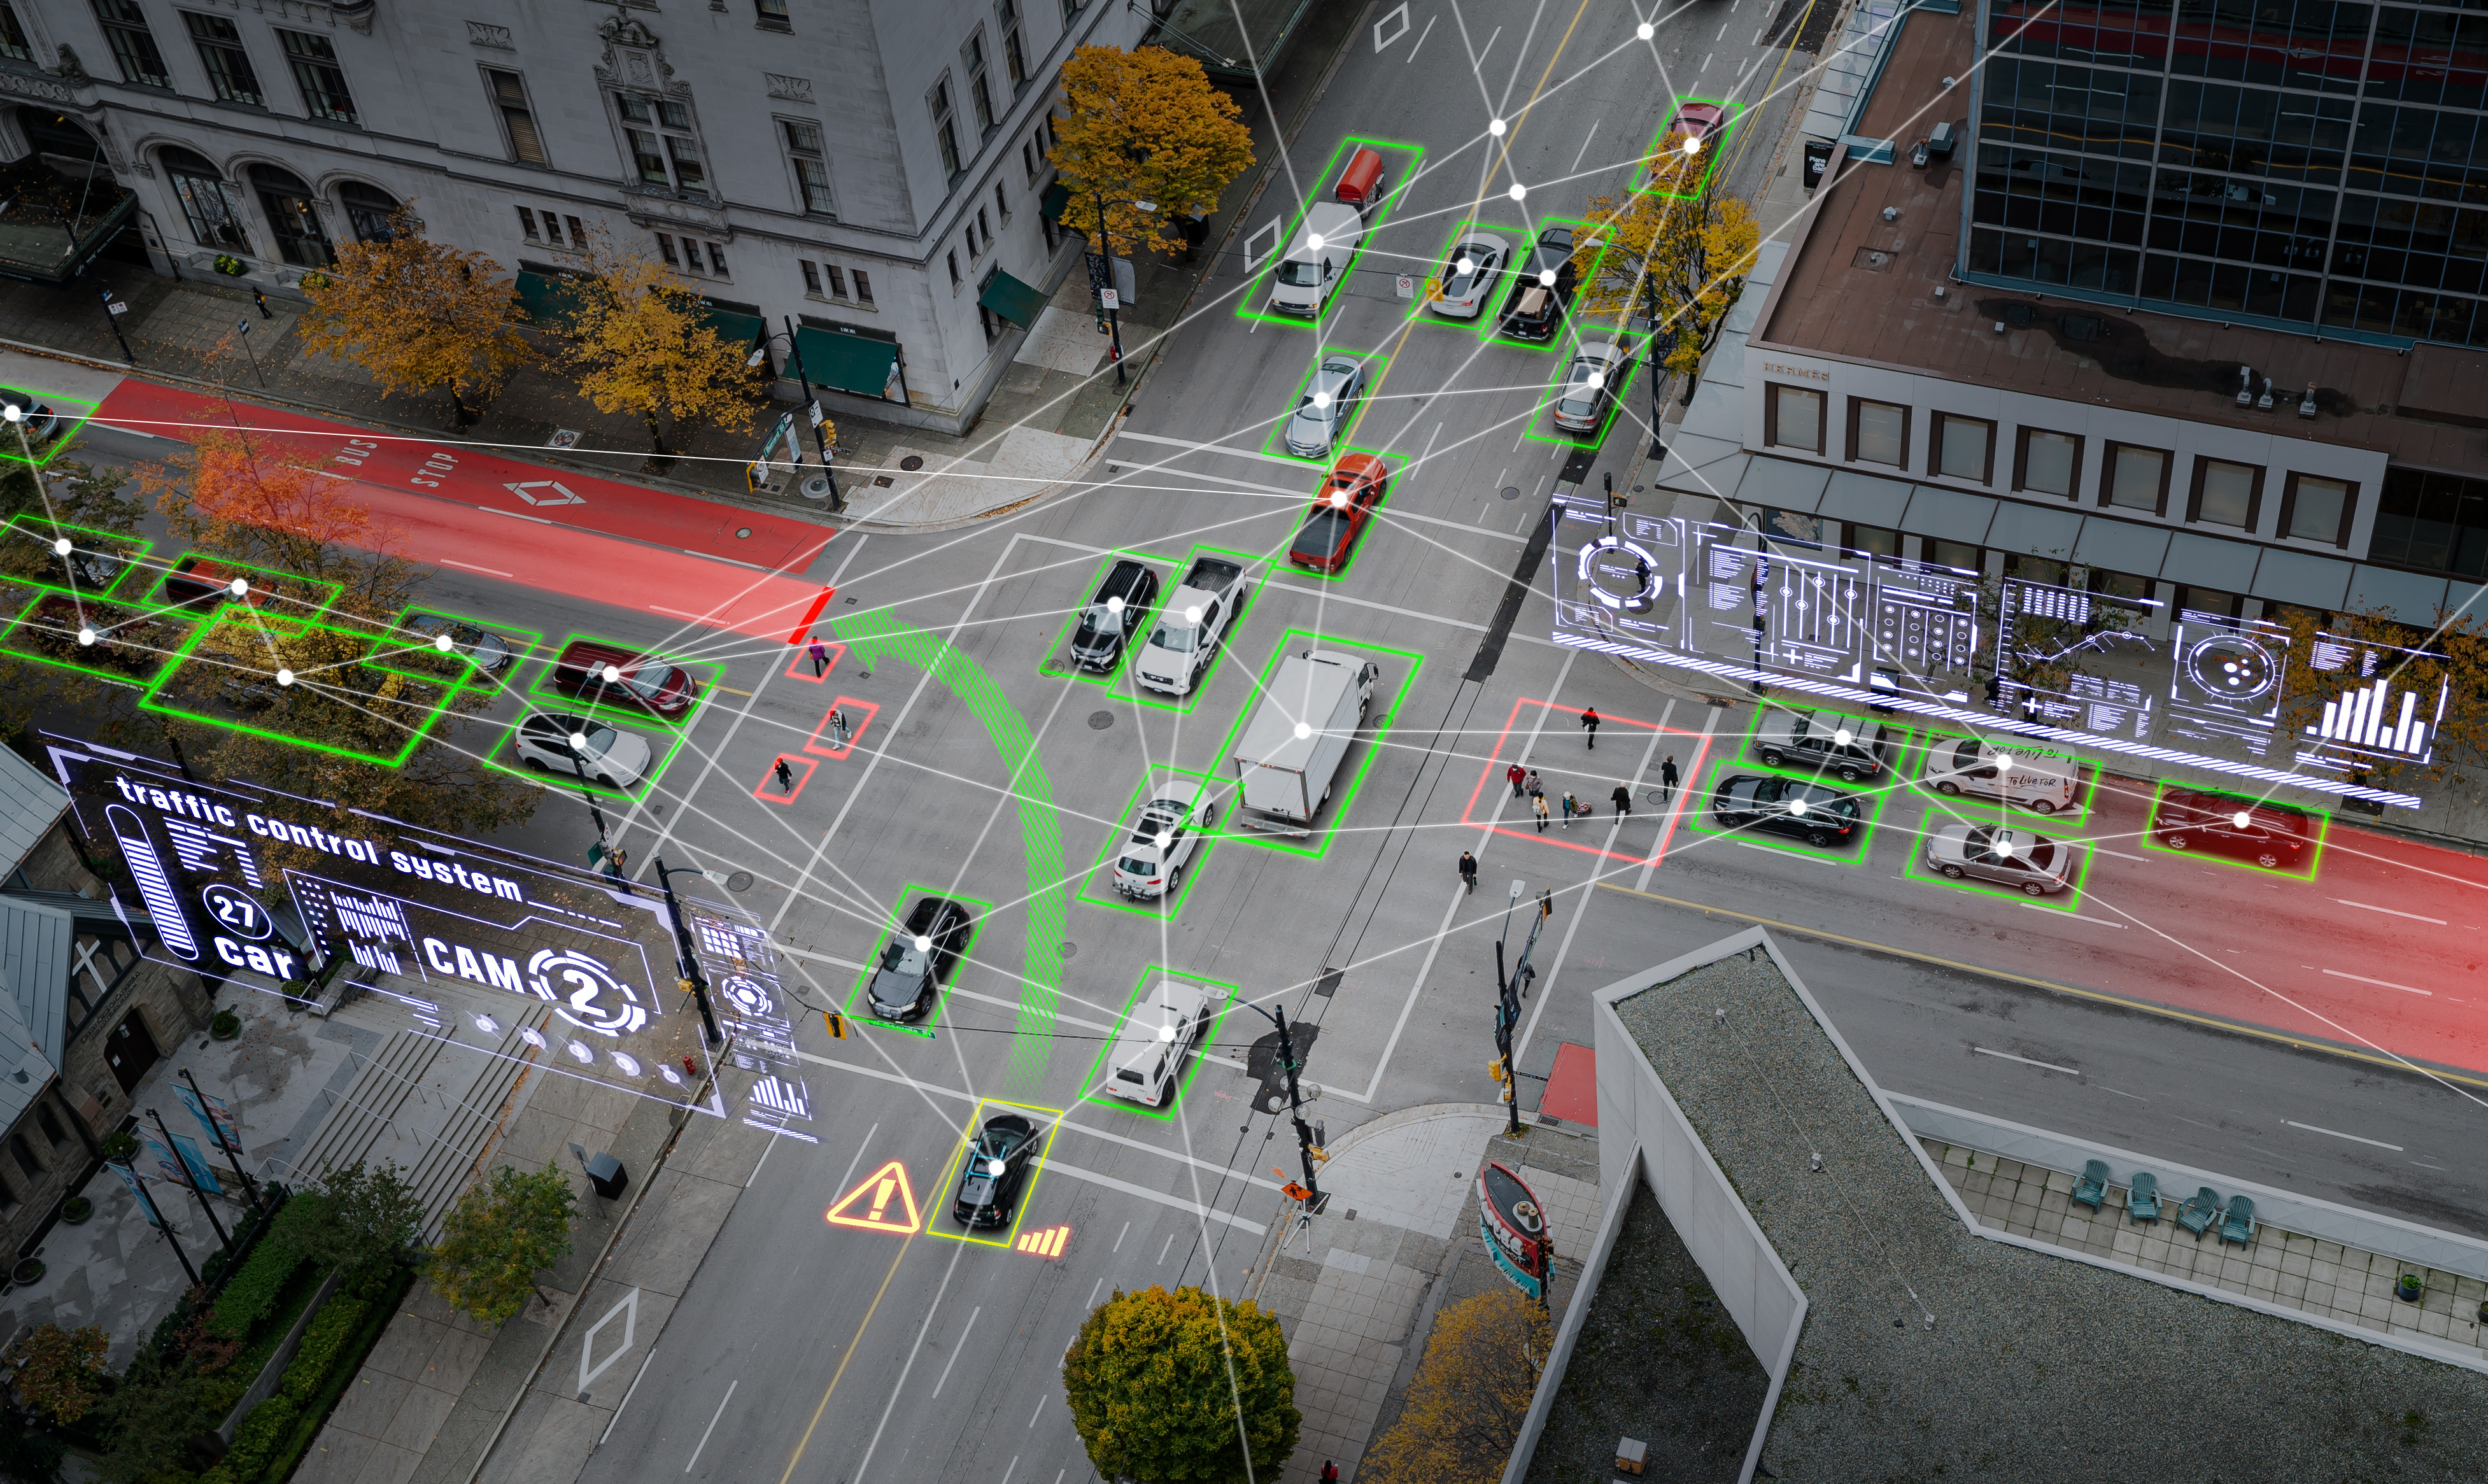 A bird's eye image of a busy crossroad, with green lines highlighting the ways vehicles can connect with their environment and each other.